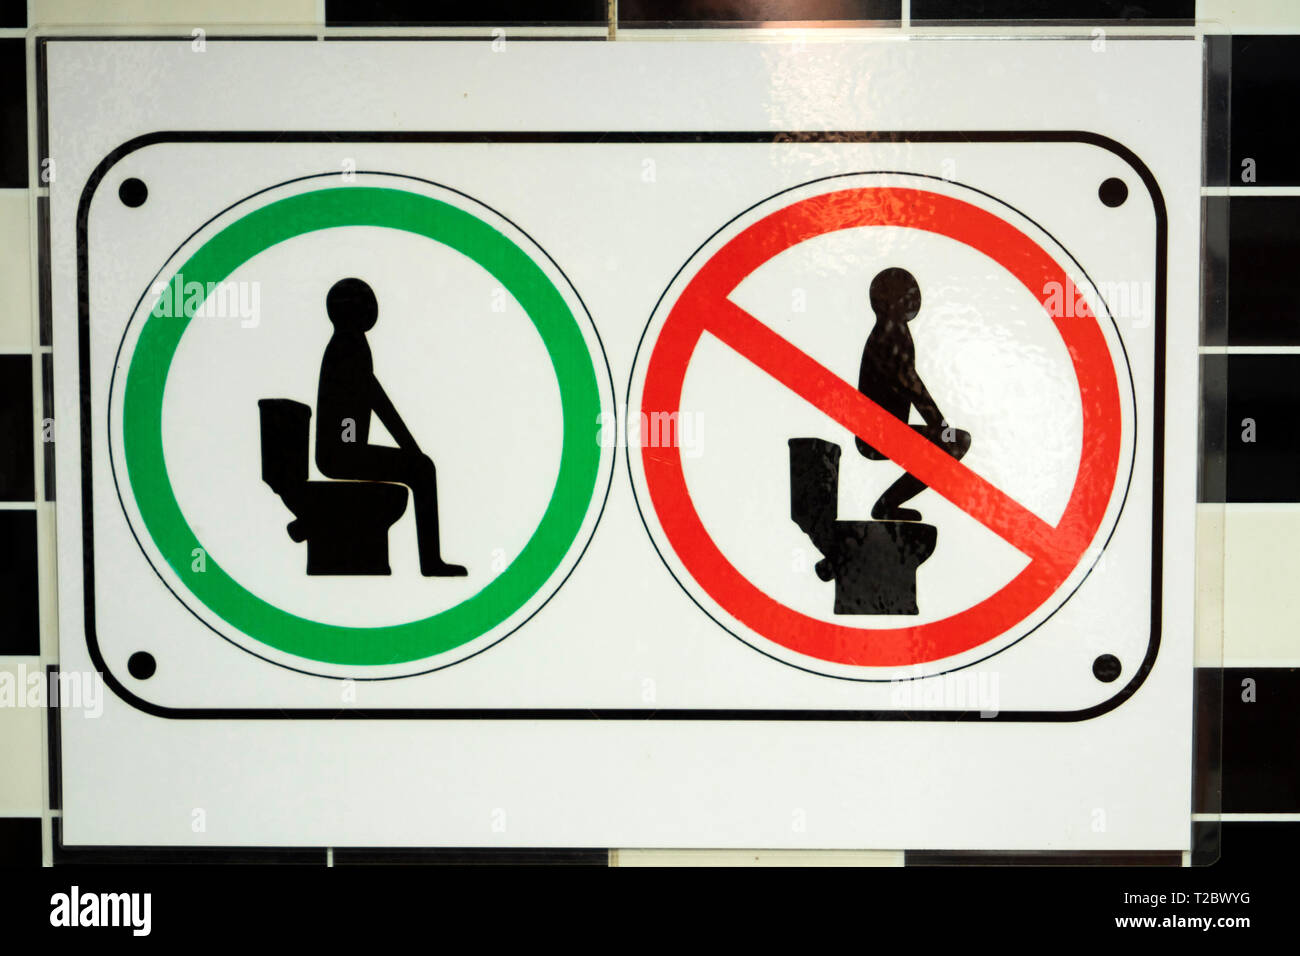 Cambodia, Kampong (Kompong) Cham, do not stand on toilet seat sign in Café toilets Stock Photo